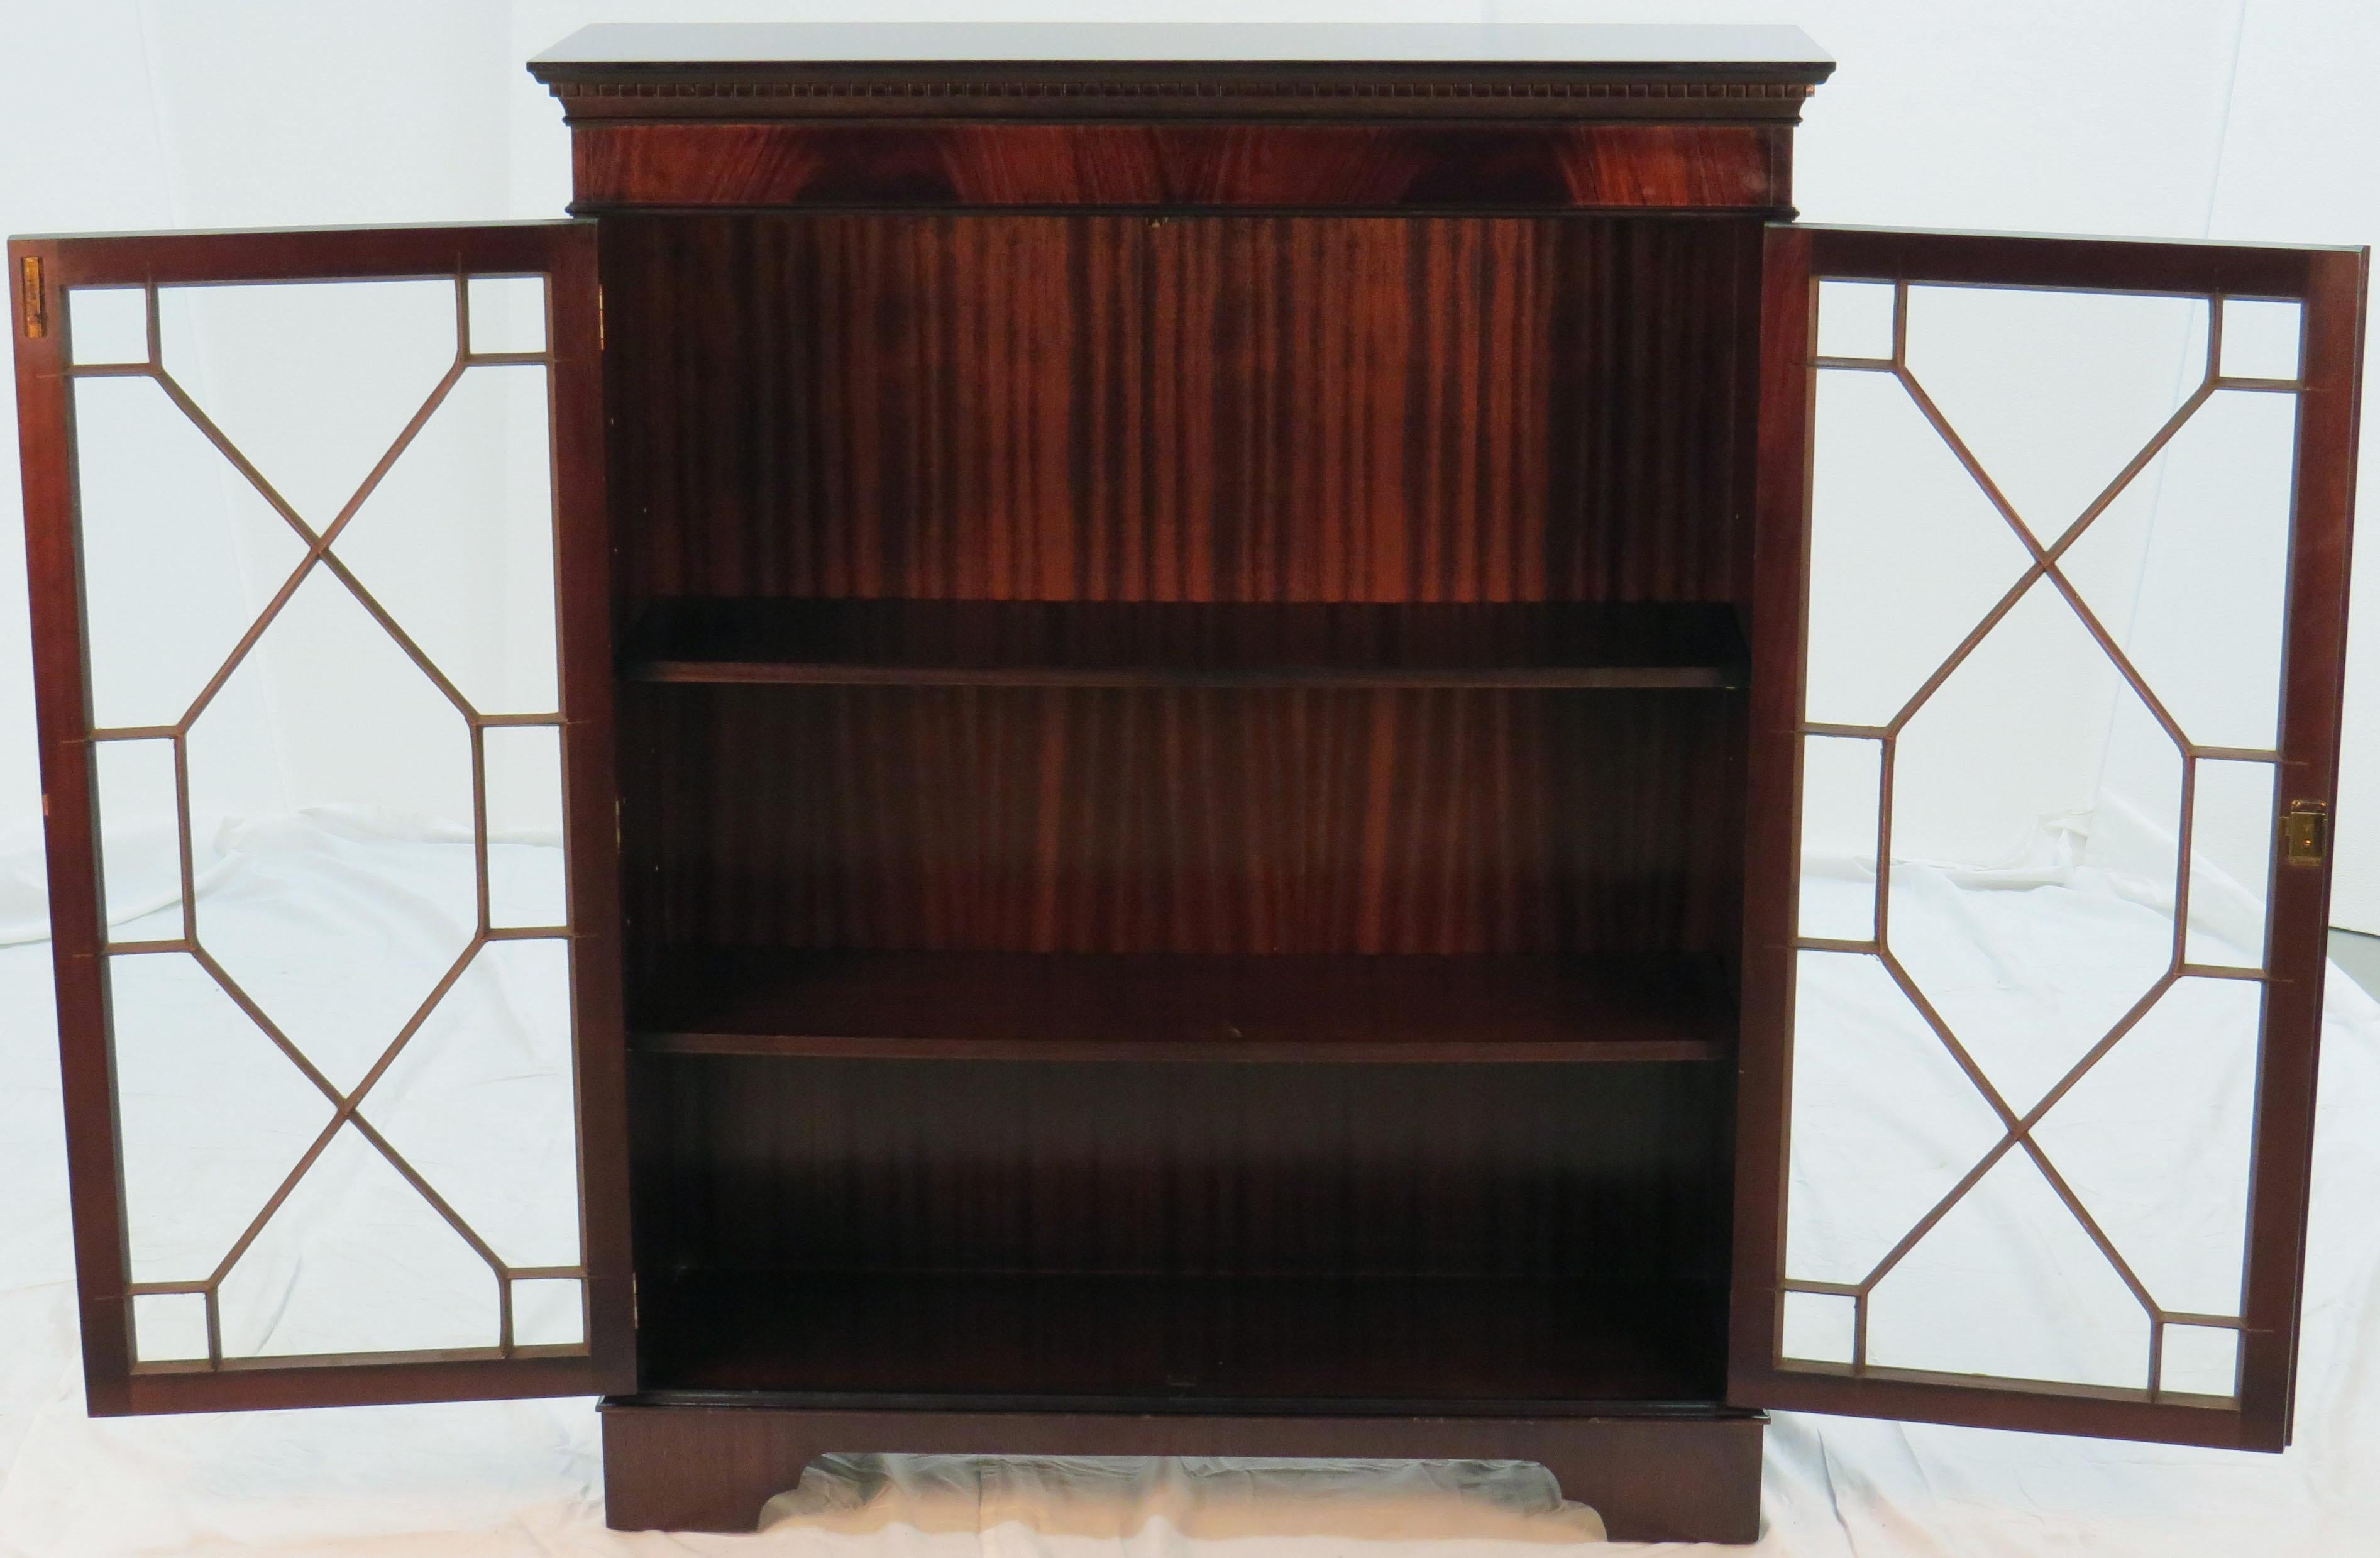 You will not find a finer piece of furniture for displaying just about anything! This antique English mahogany bookcase with glass doors is a stunning piece in good condition that is sure to remain an integral part of your furniture collection for